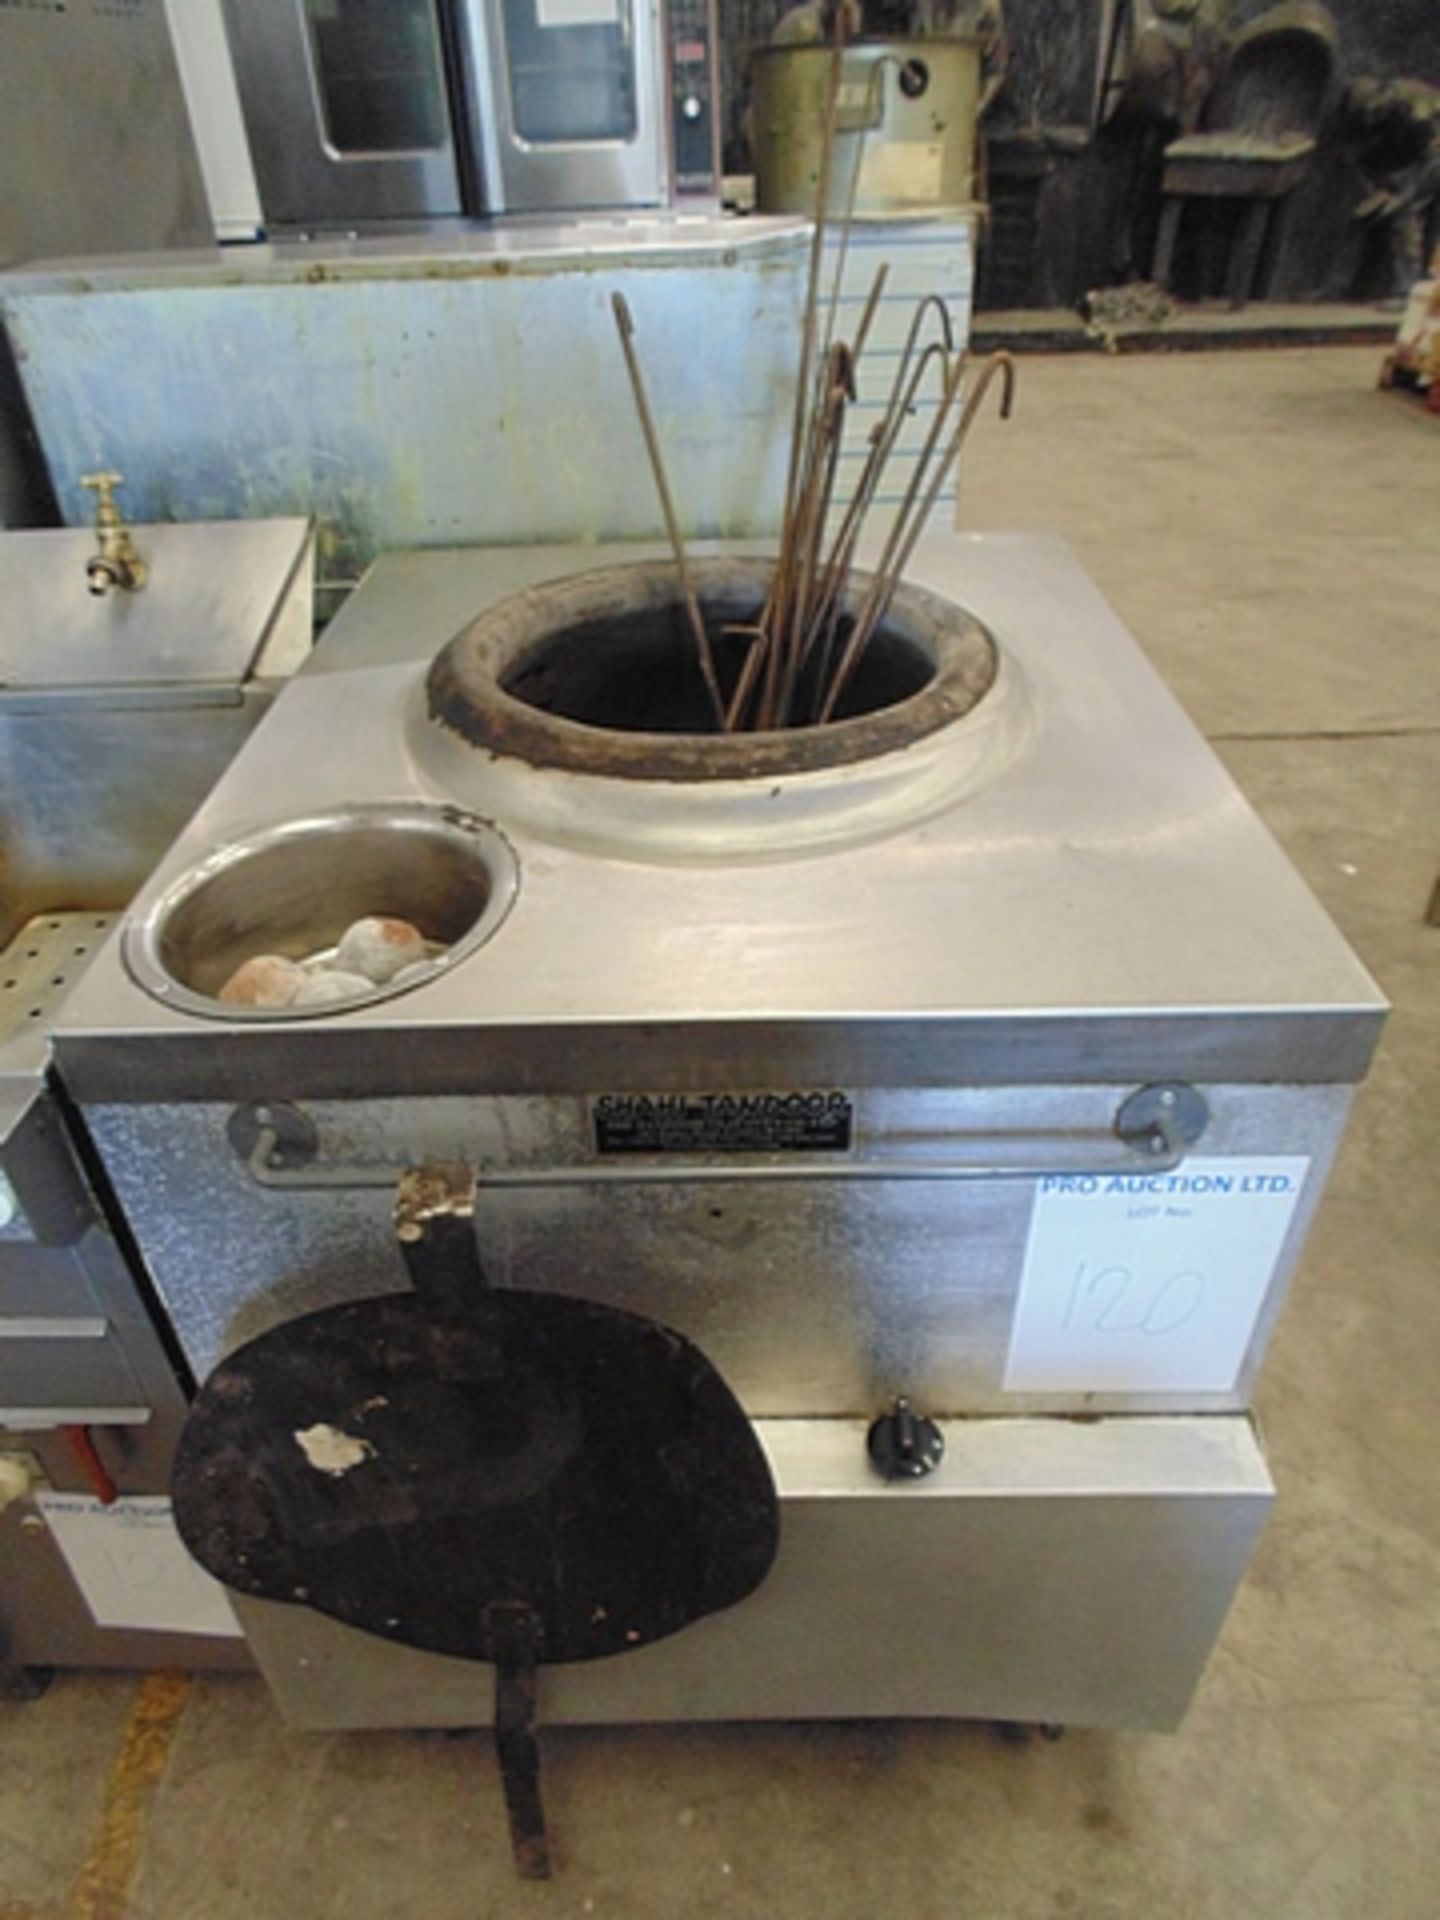 Shahi Tandoori tandoor clay oven gas stainlesss sttel construction variable temperature controller